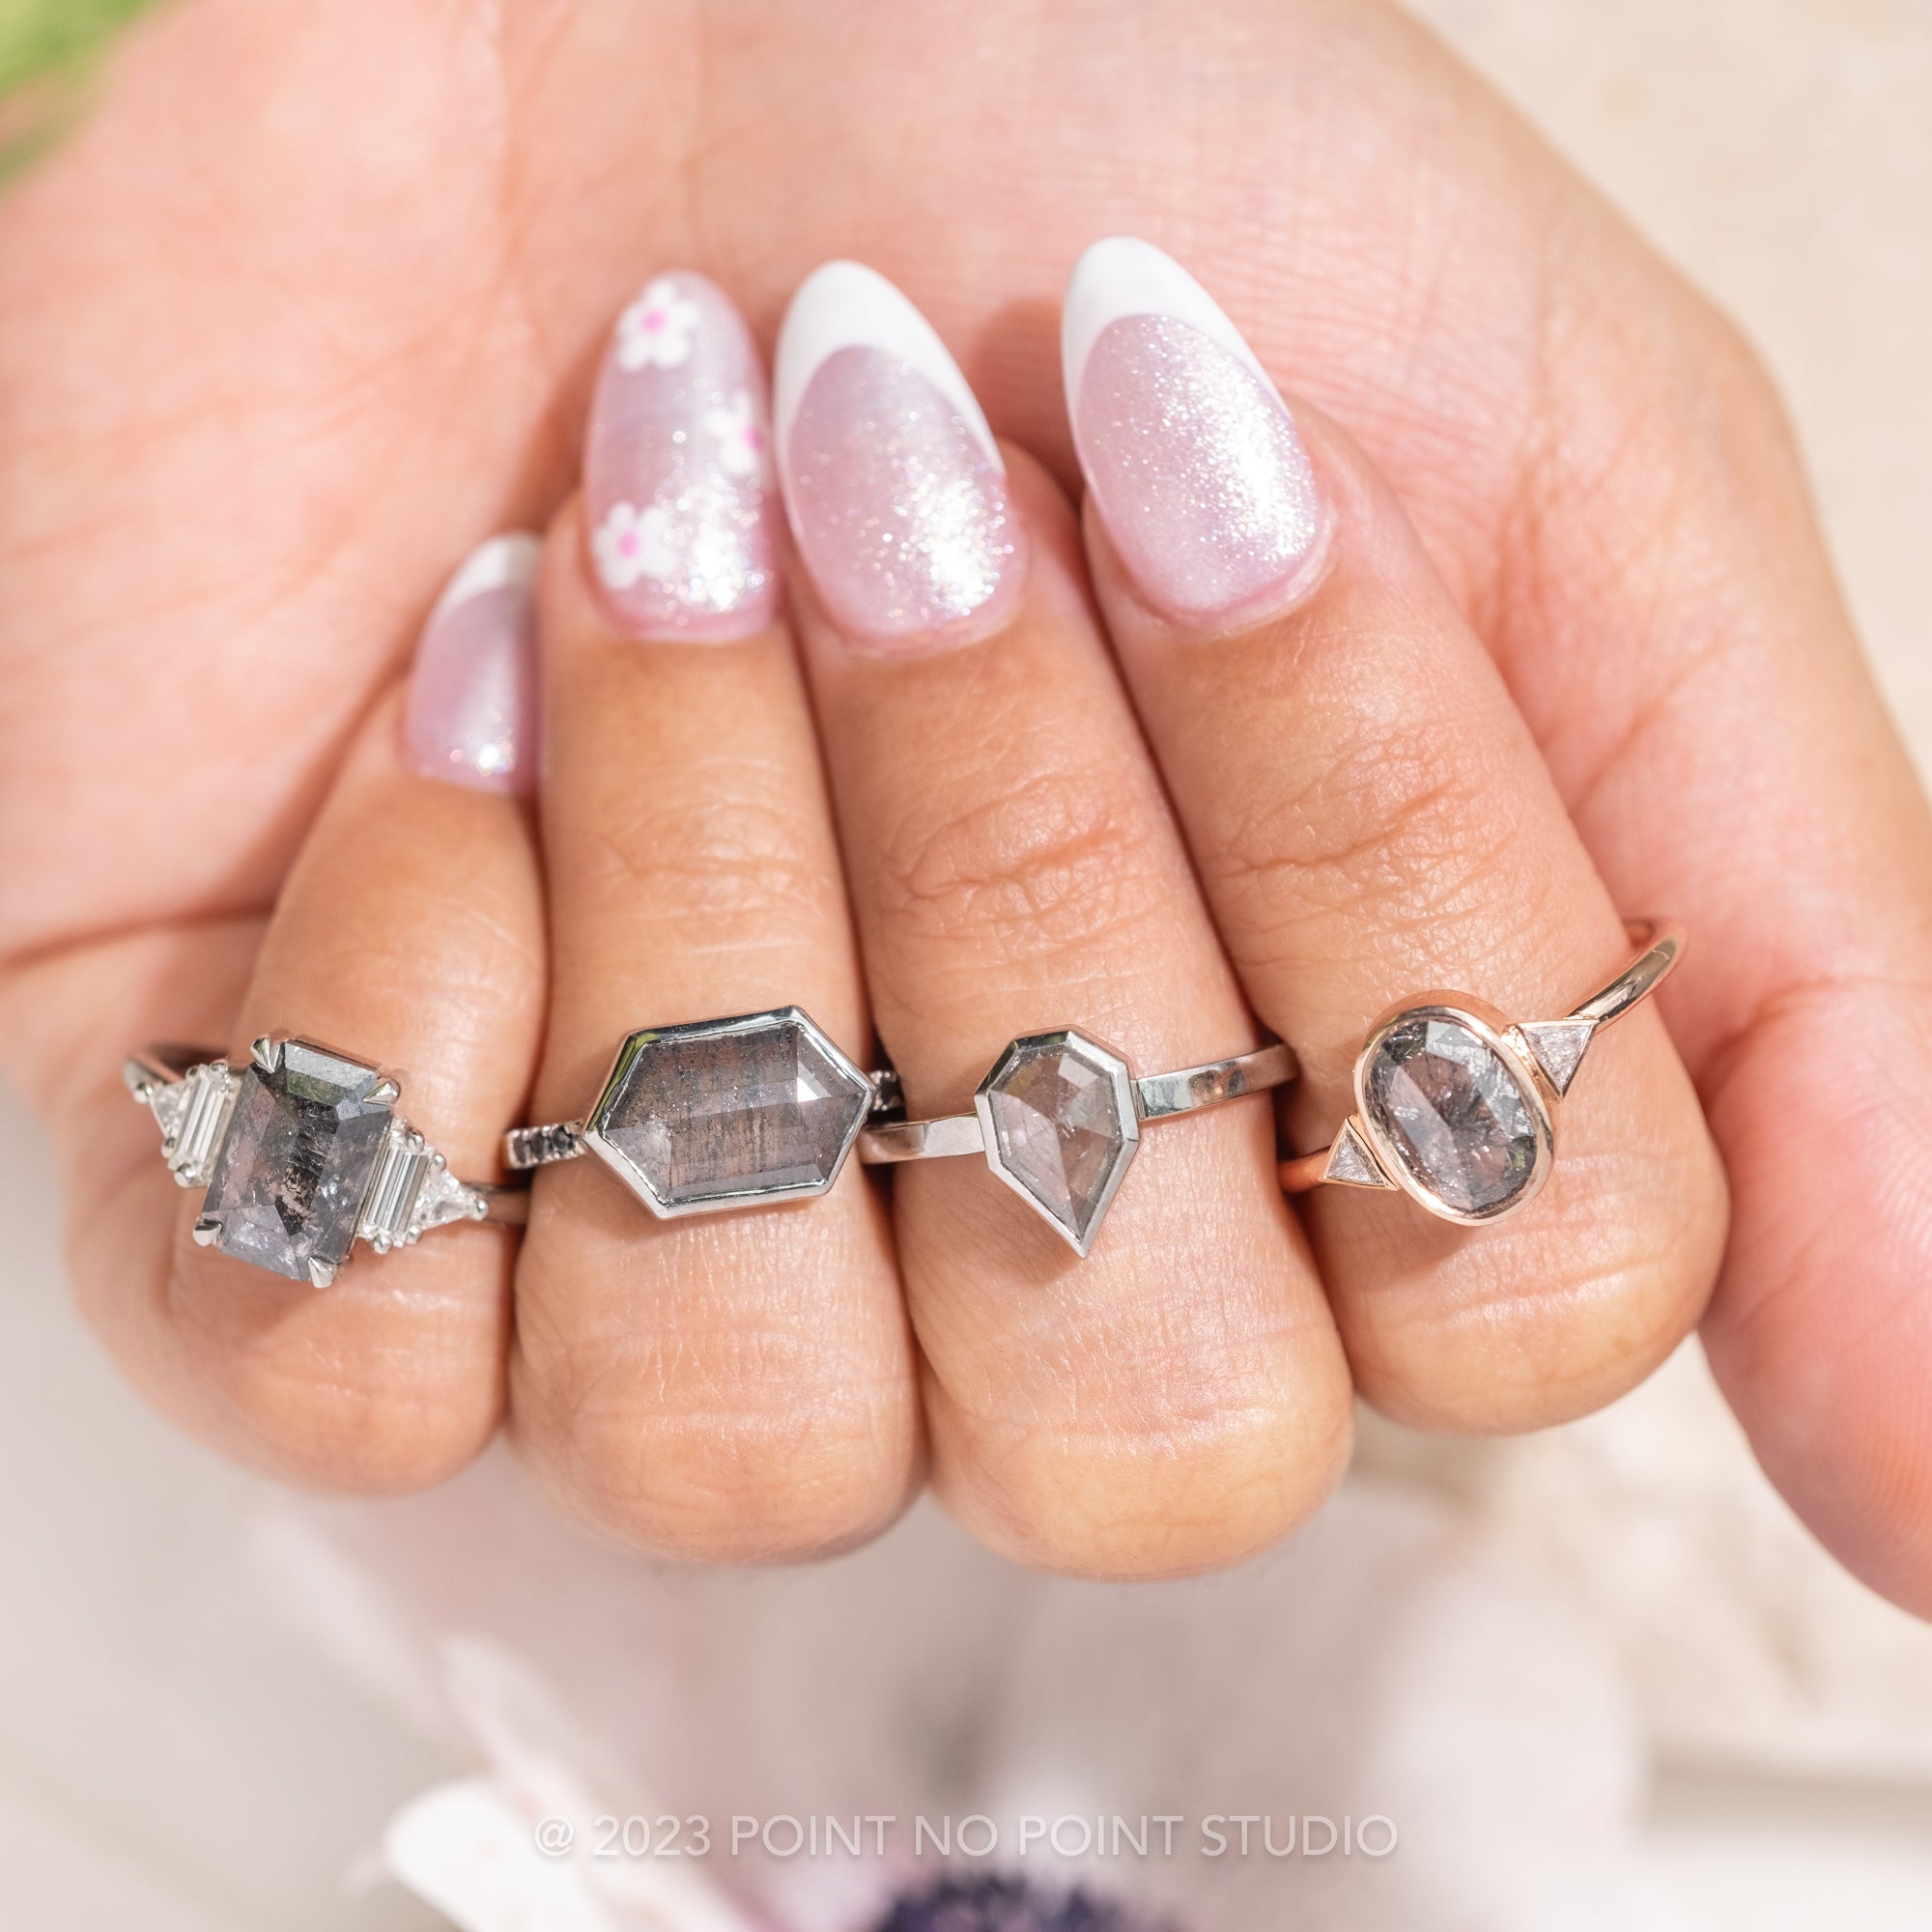 Lab Grown Diamond and Moissanite Engagement Rings | Cullen Jewellery